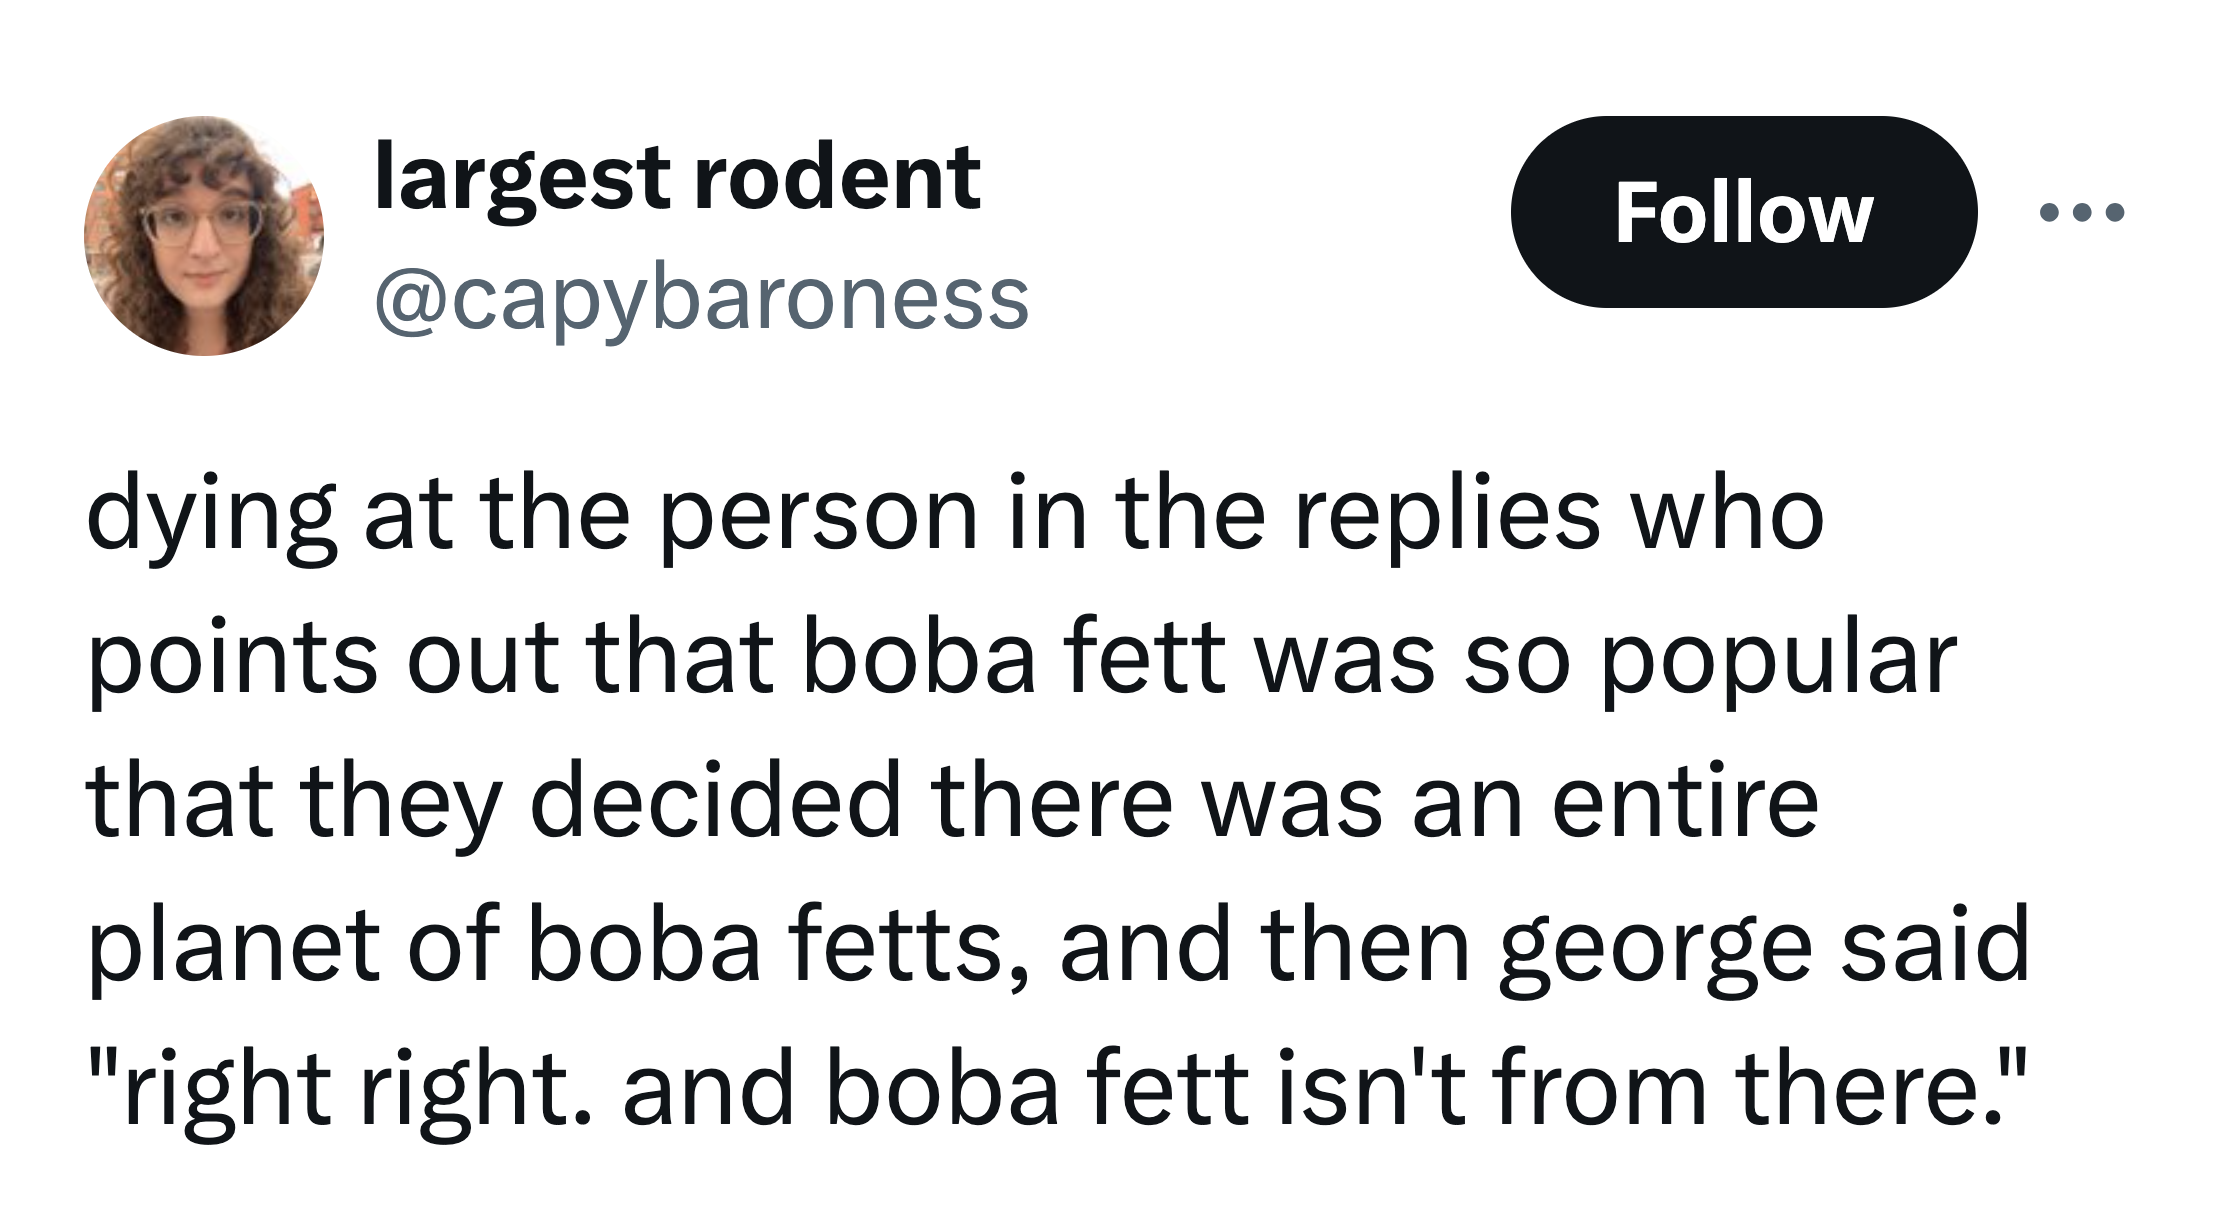 screenshot - largest rodent dying at the person in the replies who points out that boba fett was so popular that they decided there was an entire planet of boba fetts, and then george said "right right. and boba fett isn't from there."